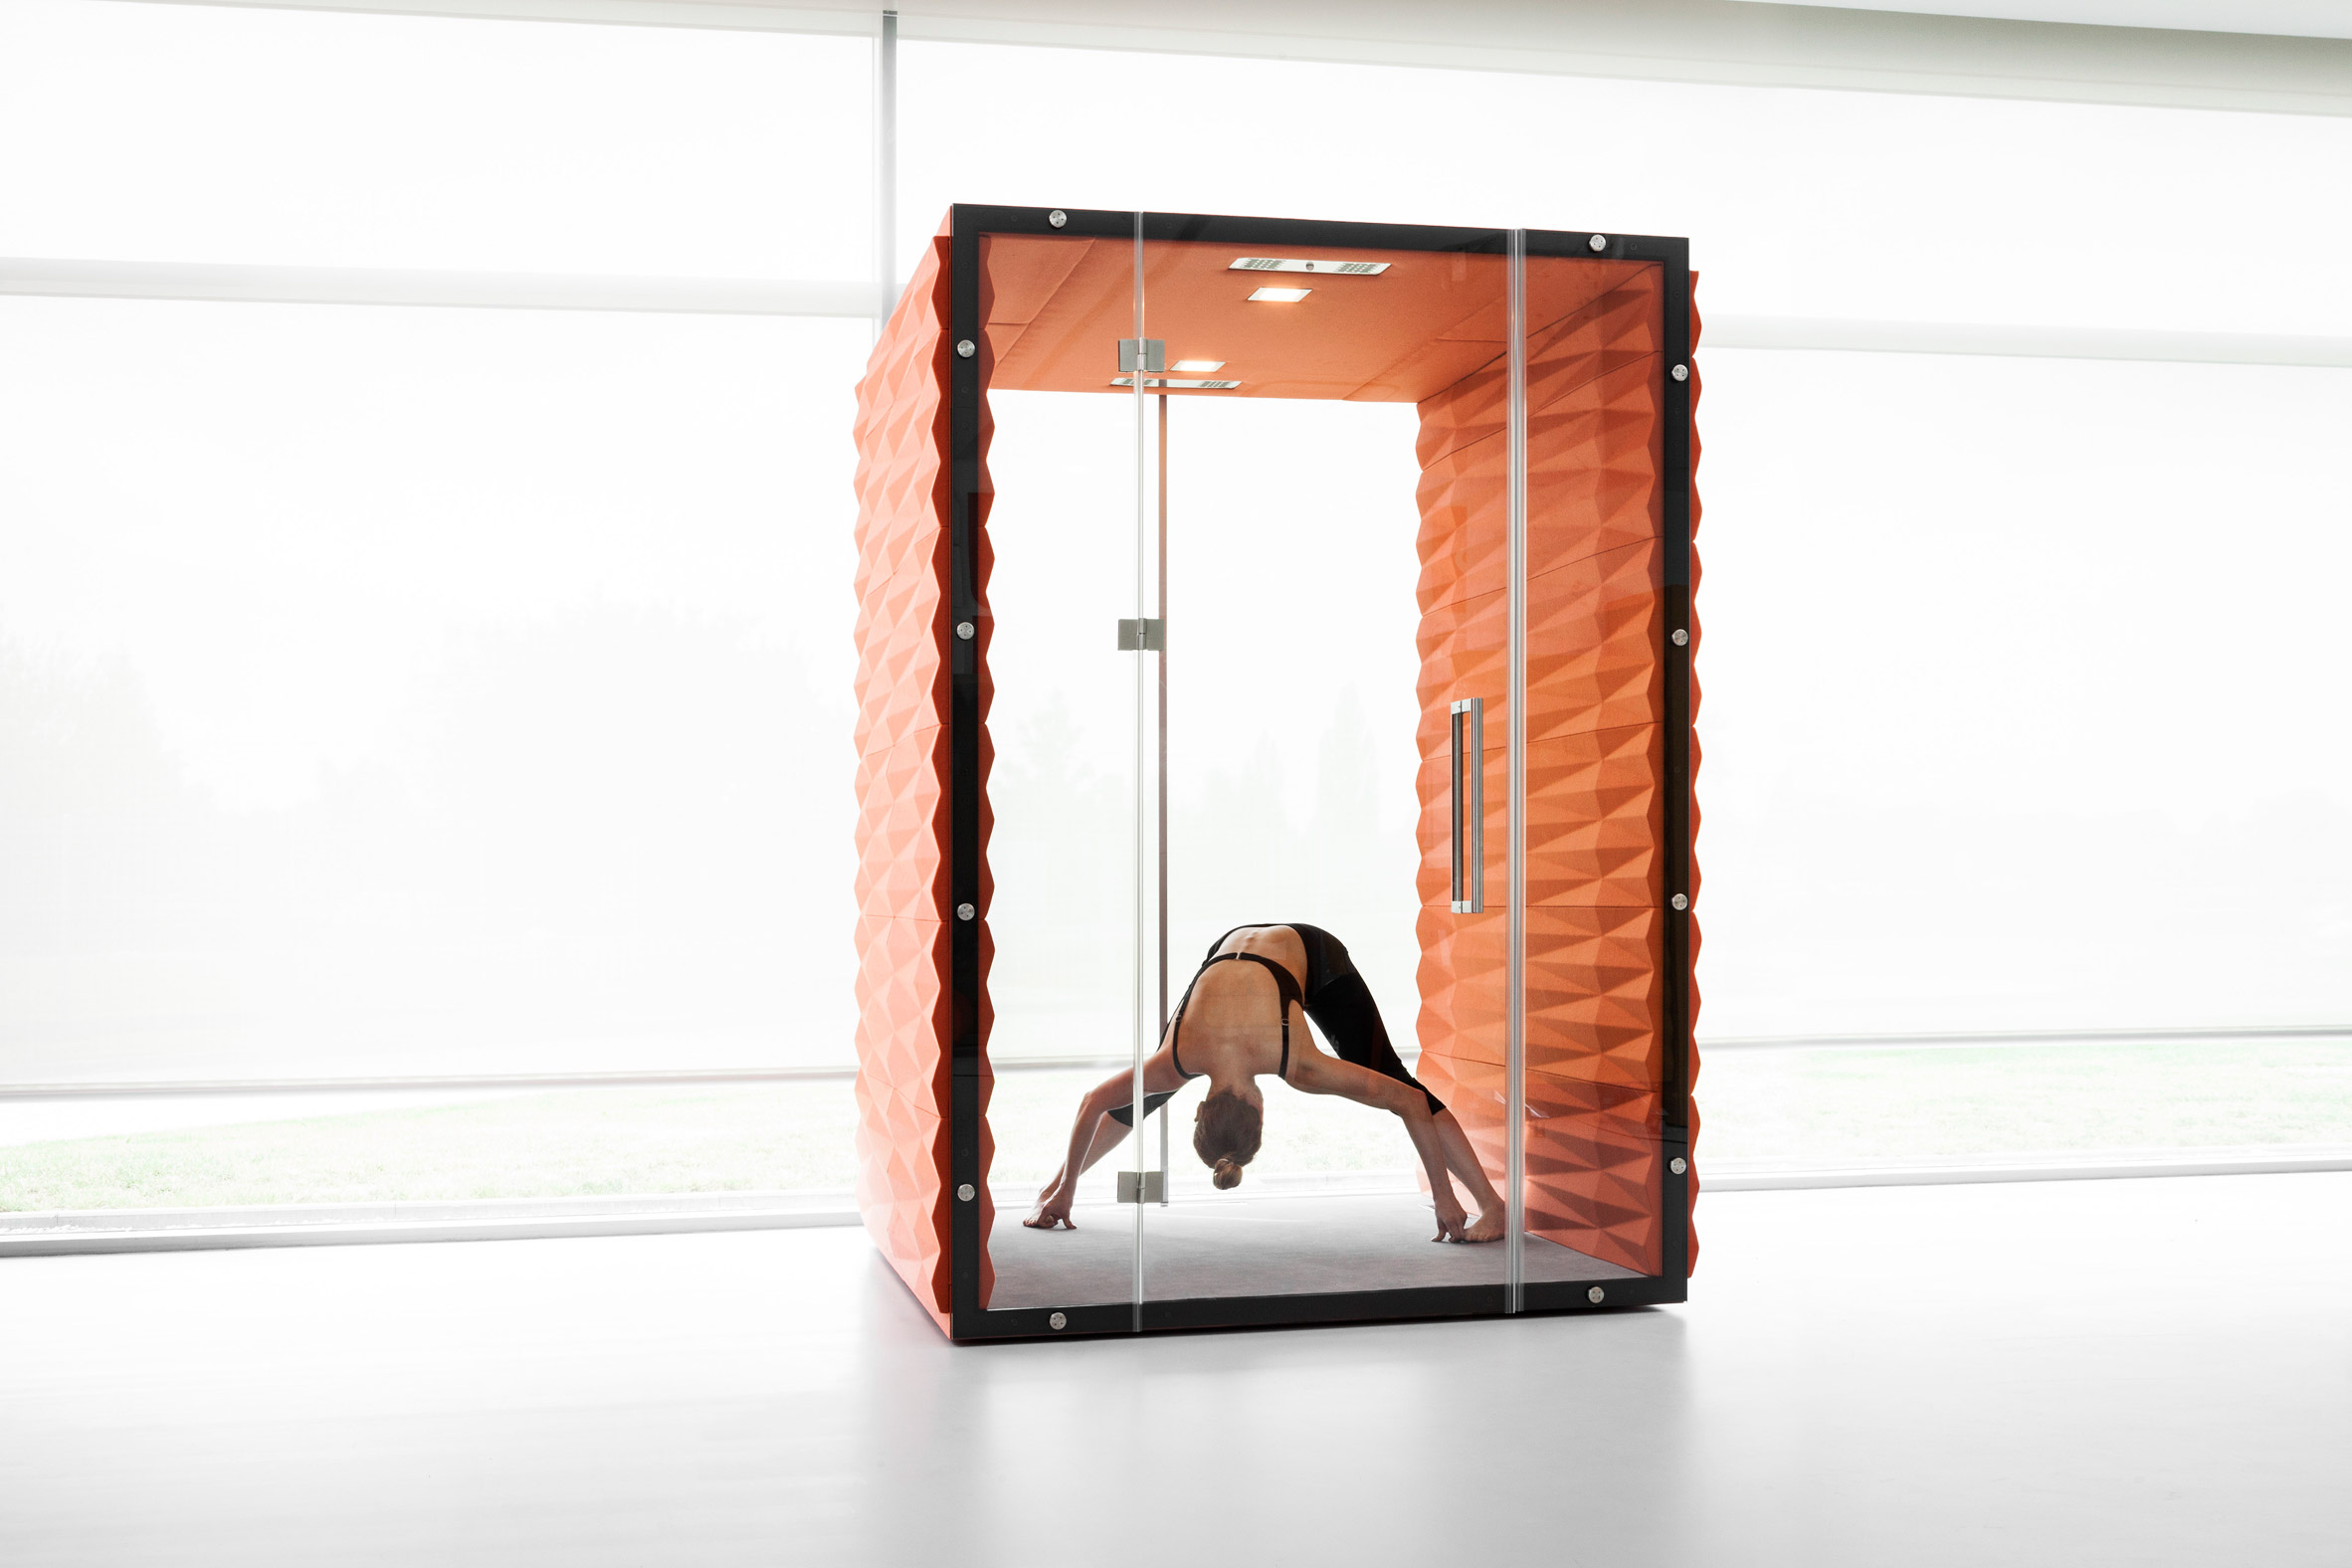 Vank's soundproof pods offer private workspaces for open-plan offices